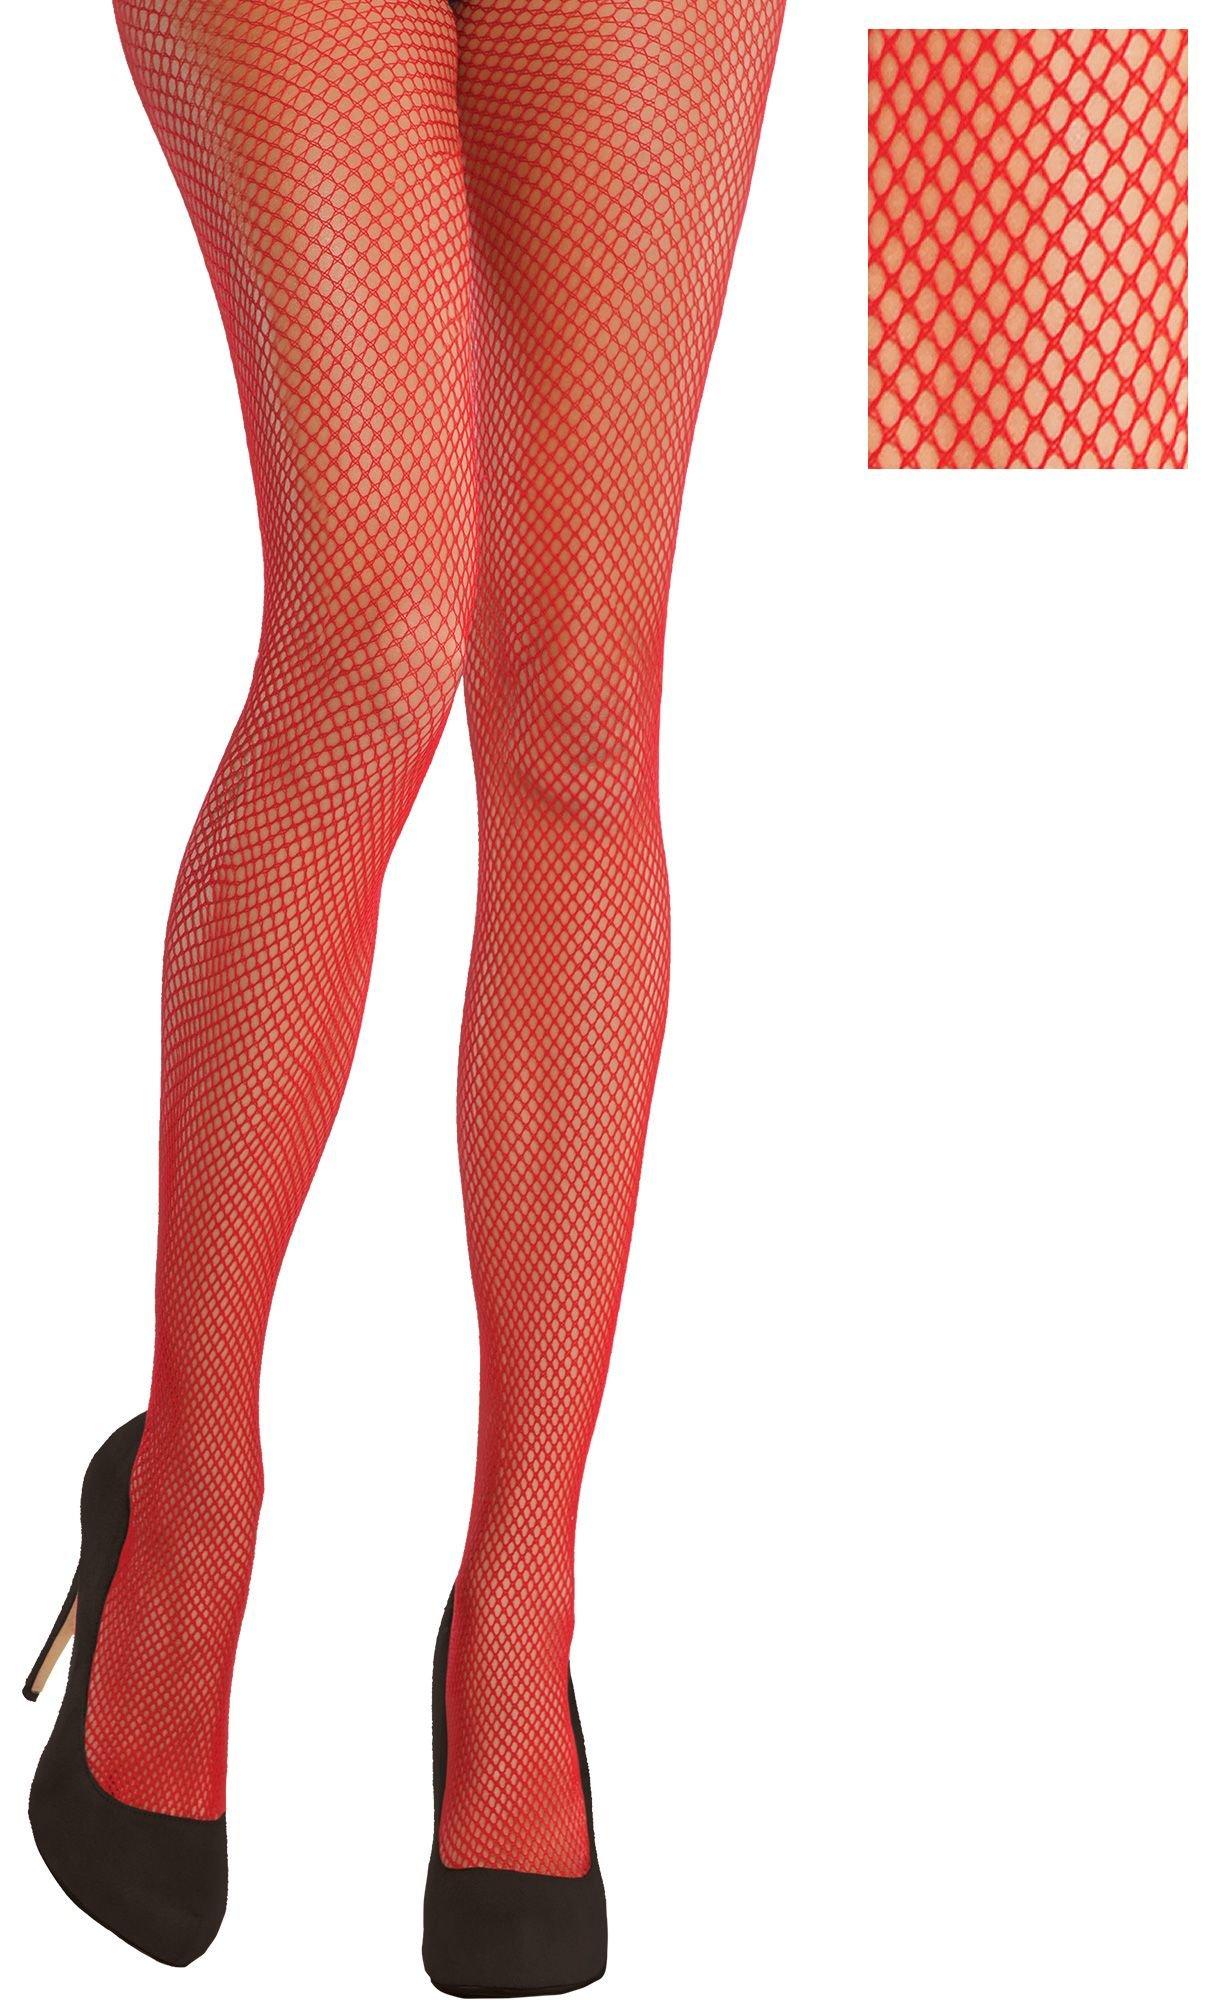 Red Fishnet Tights